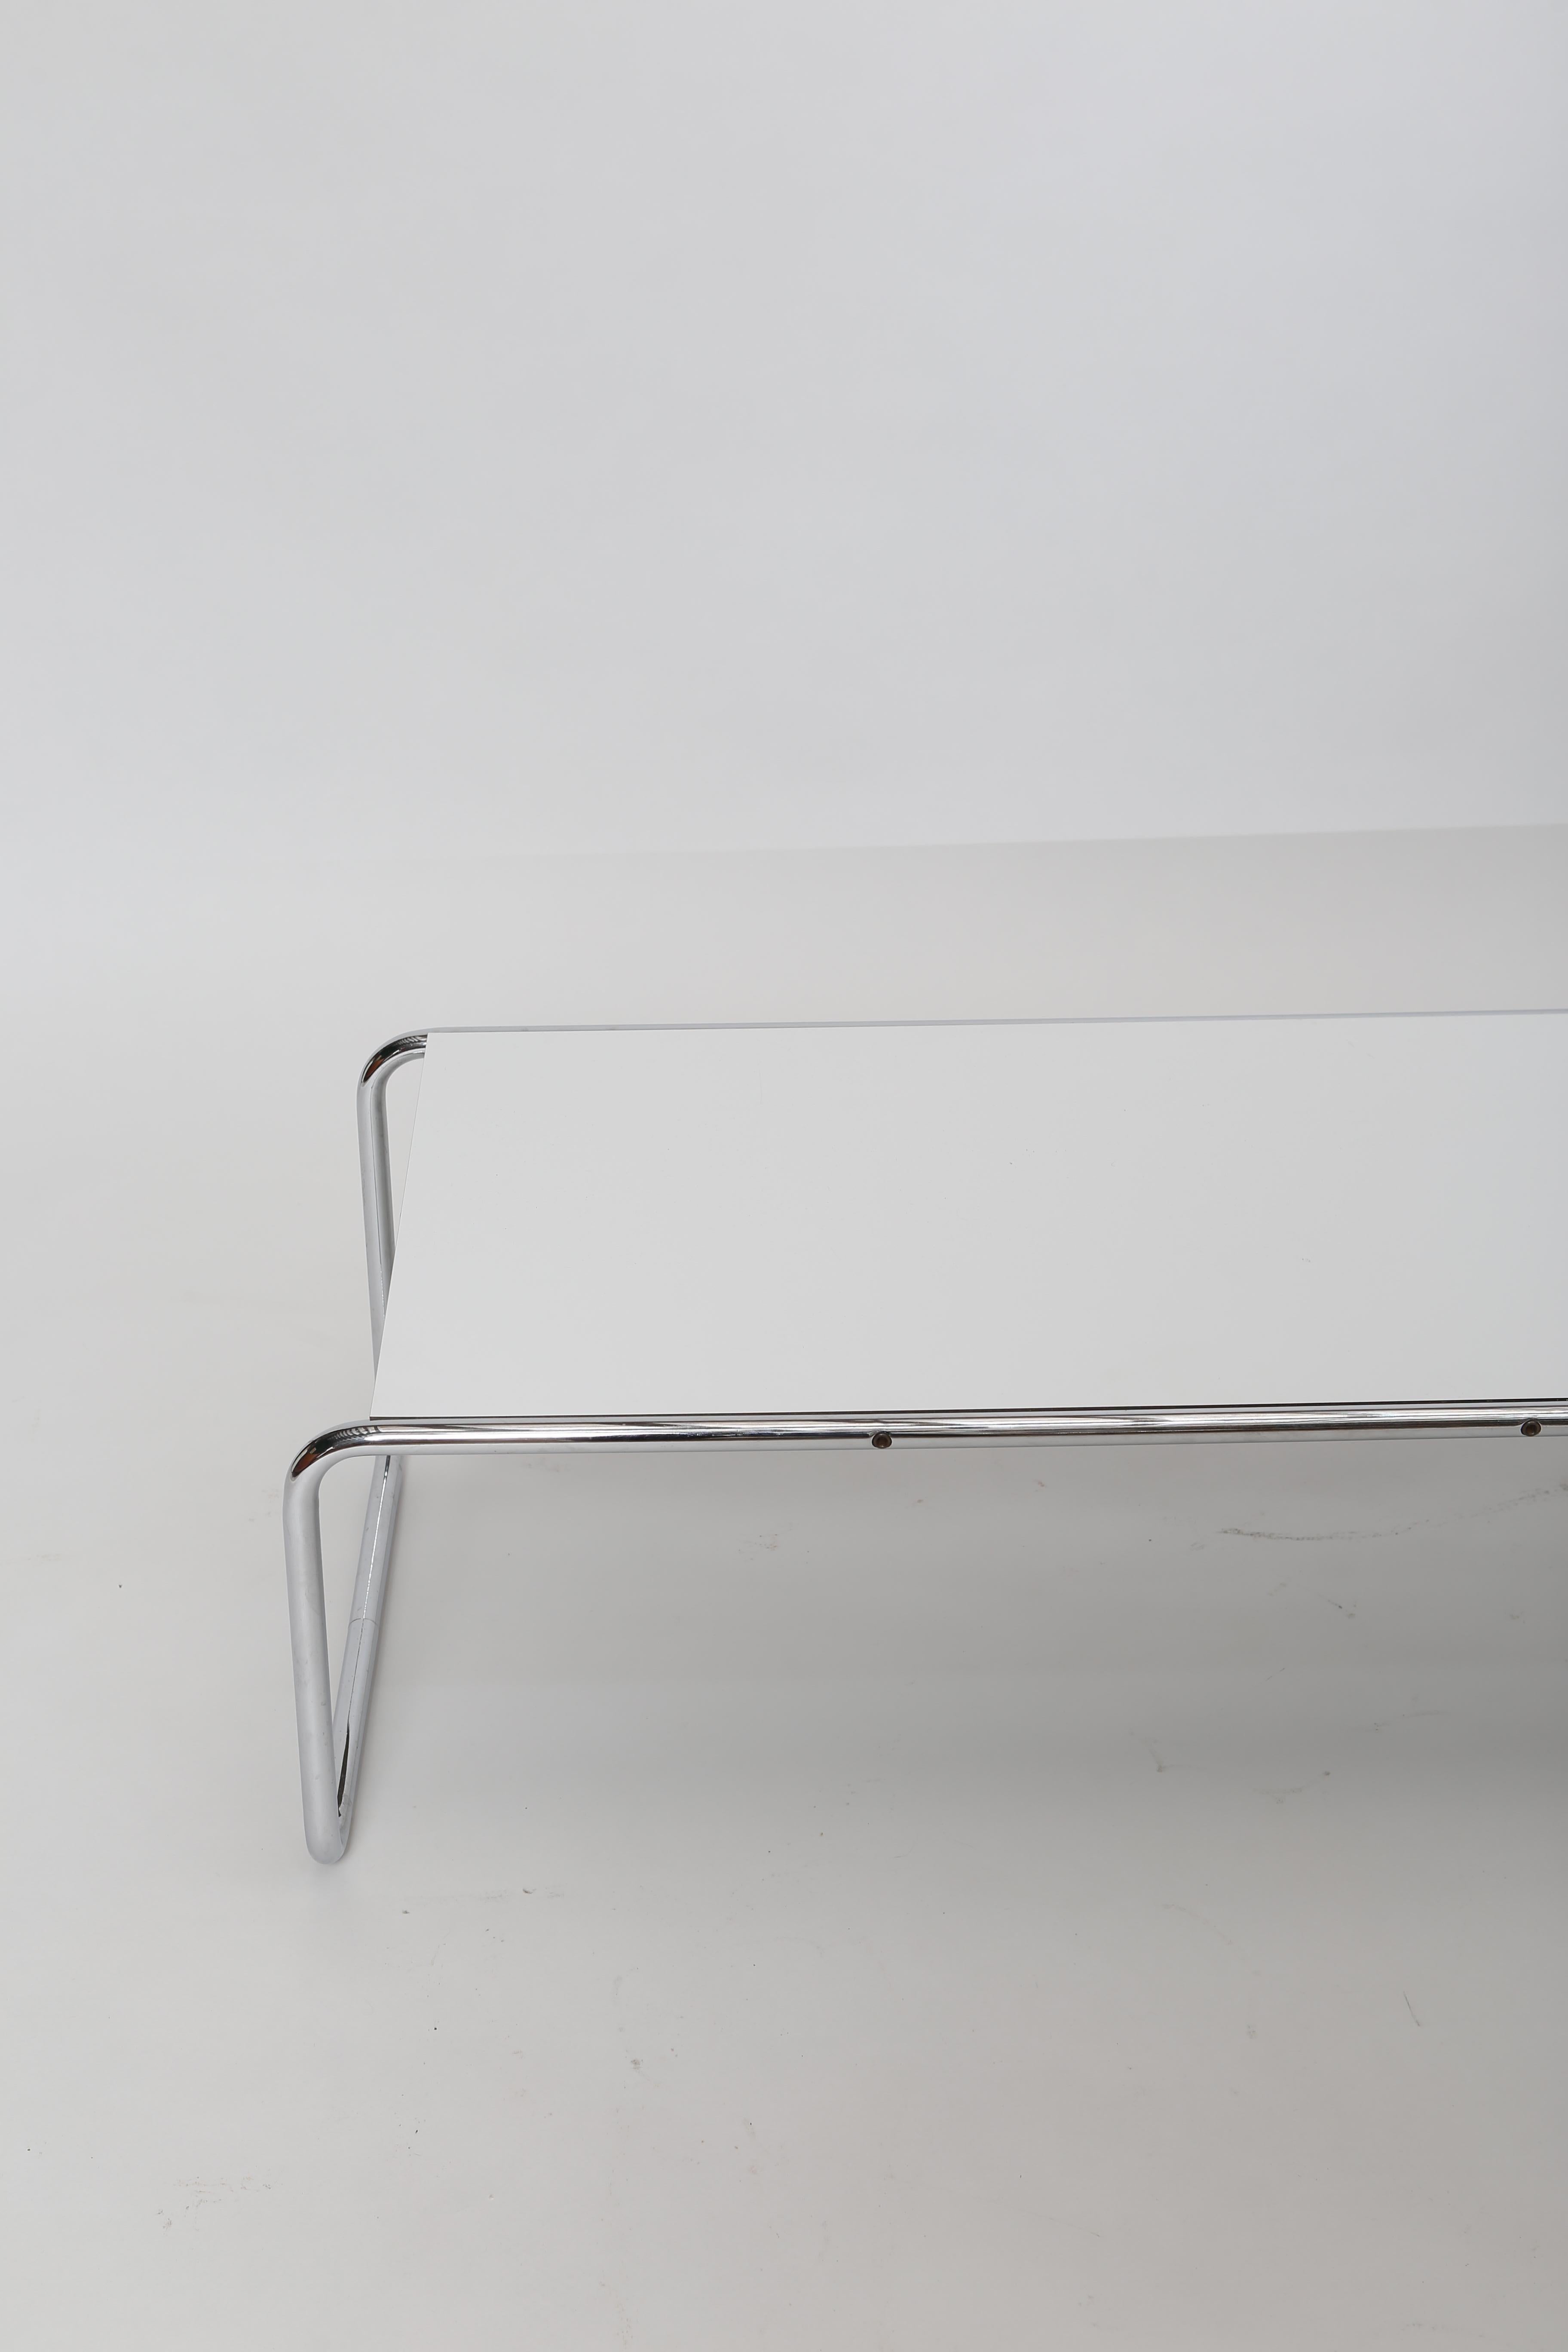 Bauhaus “Laccio” Coffee Table by Marcel Breuer for Knoll